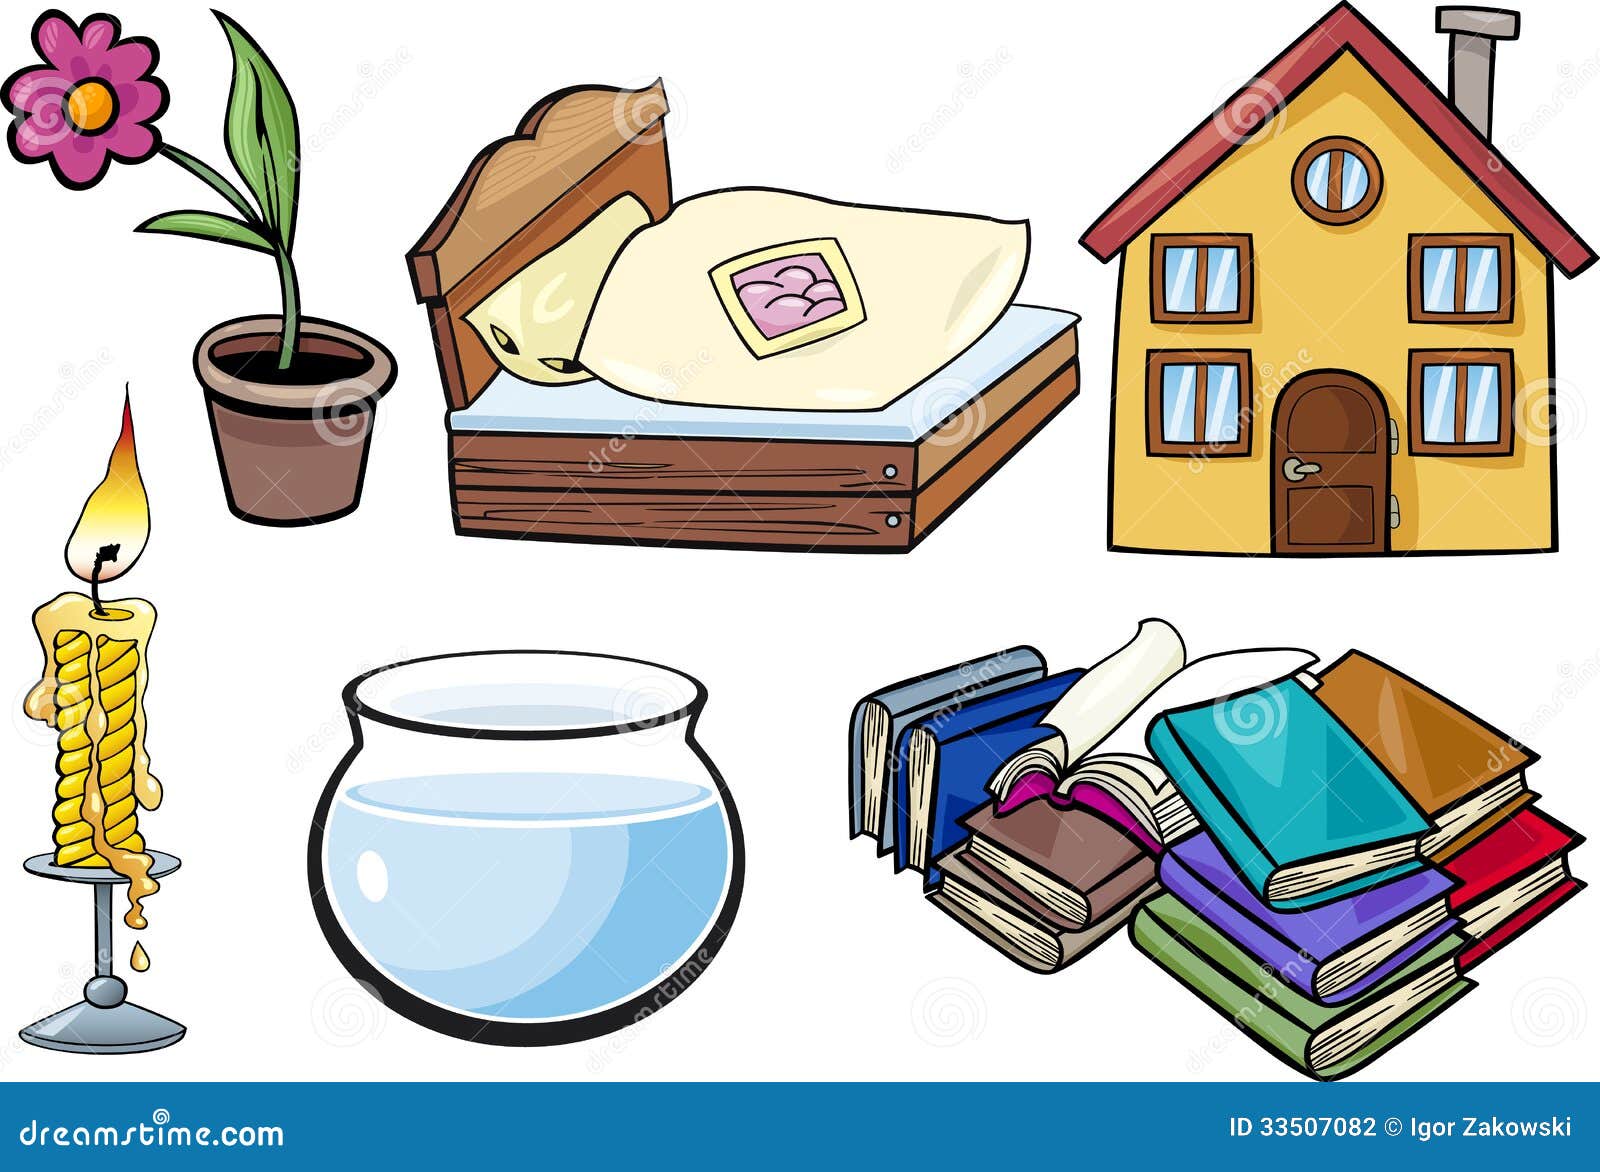 objects clipart images - photo #14